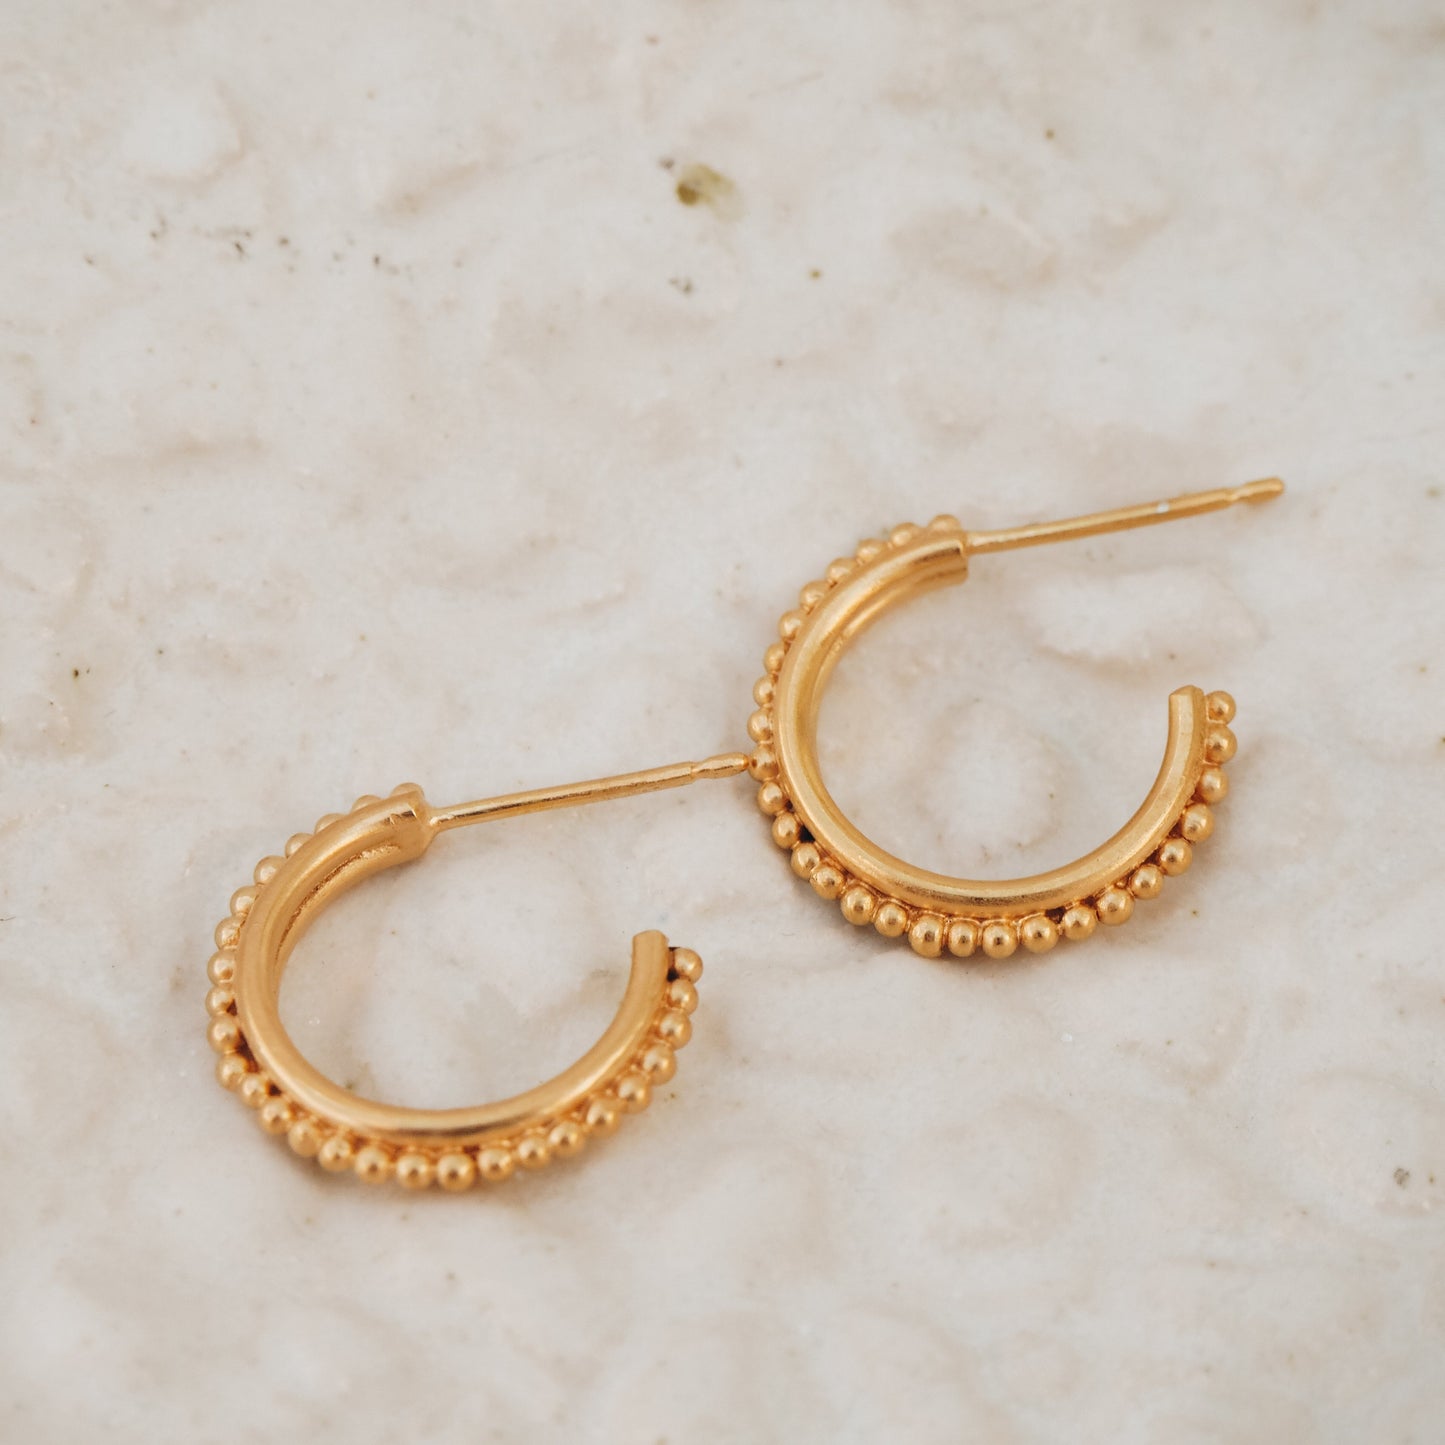 Ancient-inspired gold stud hoop earrings with delicate granulation detailing, a timeless statement.